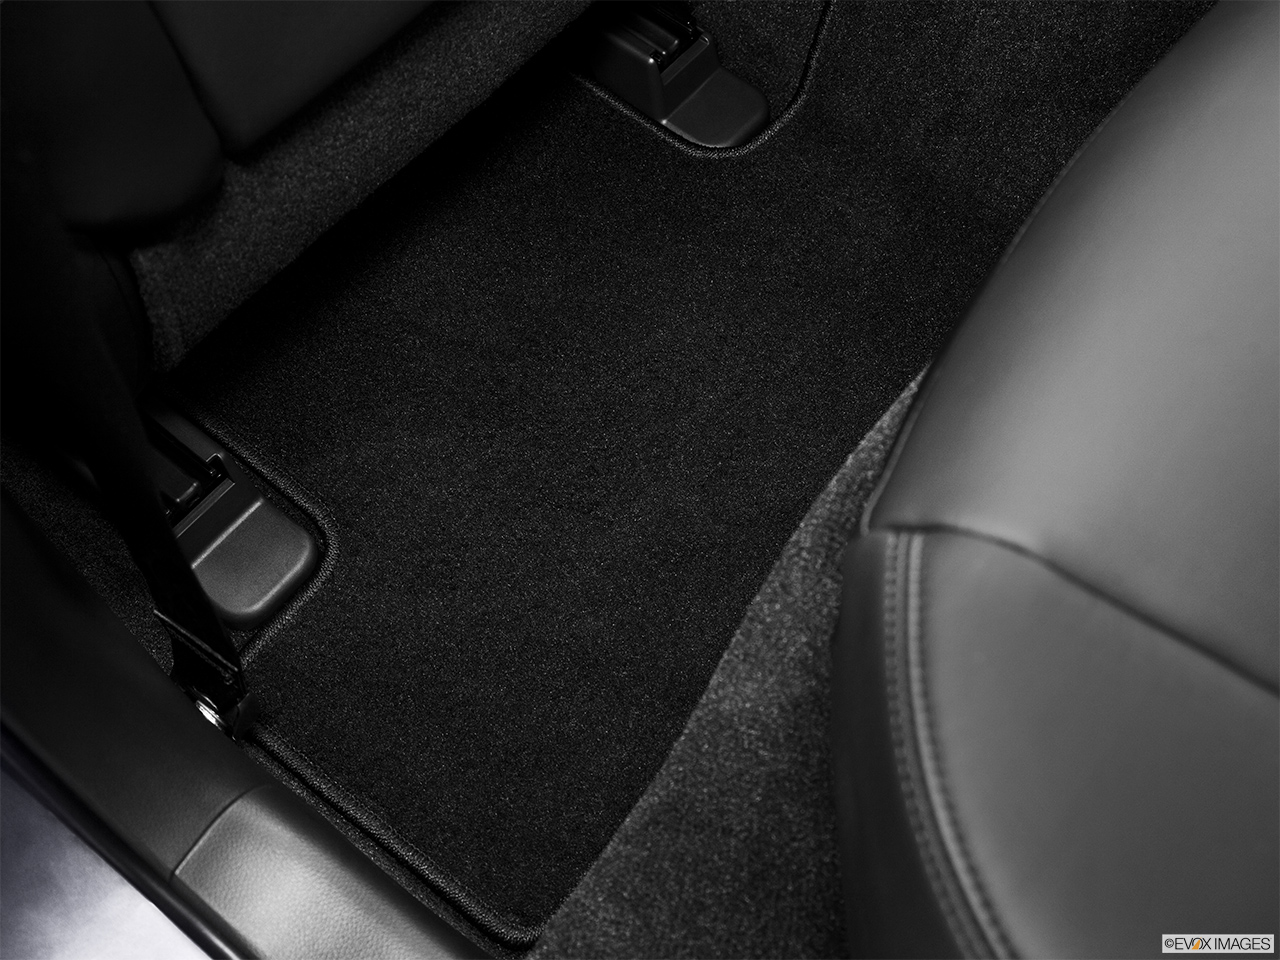 2013 Infiniti EX EX37 Journey AWD Rear driver's side floor mat. Mid-seat level from outside looking in. 